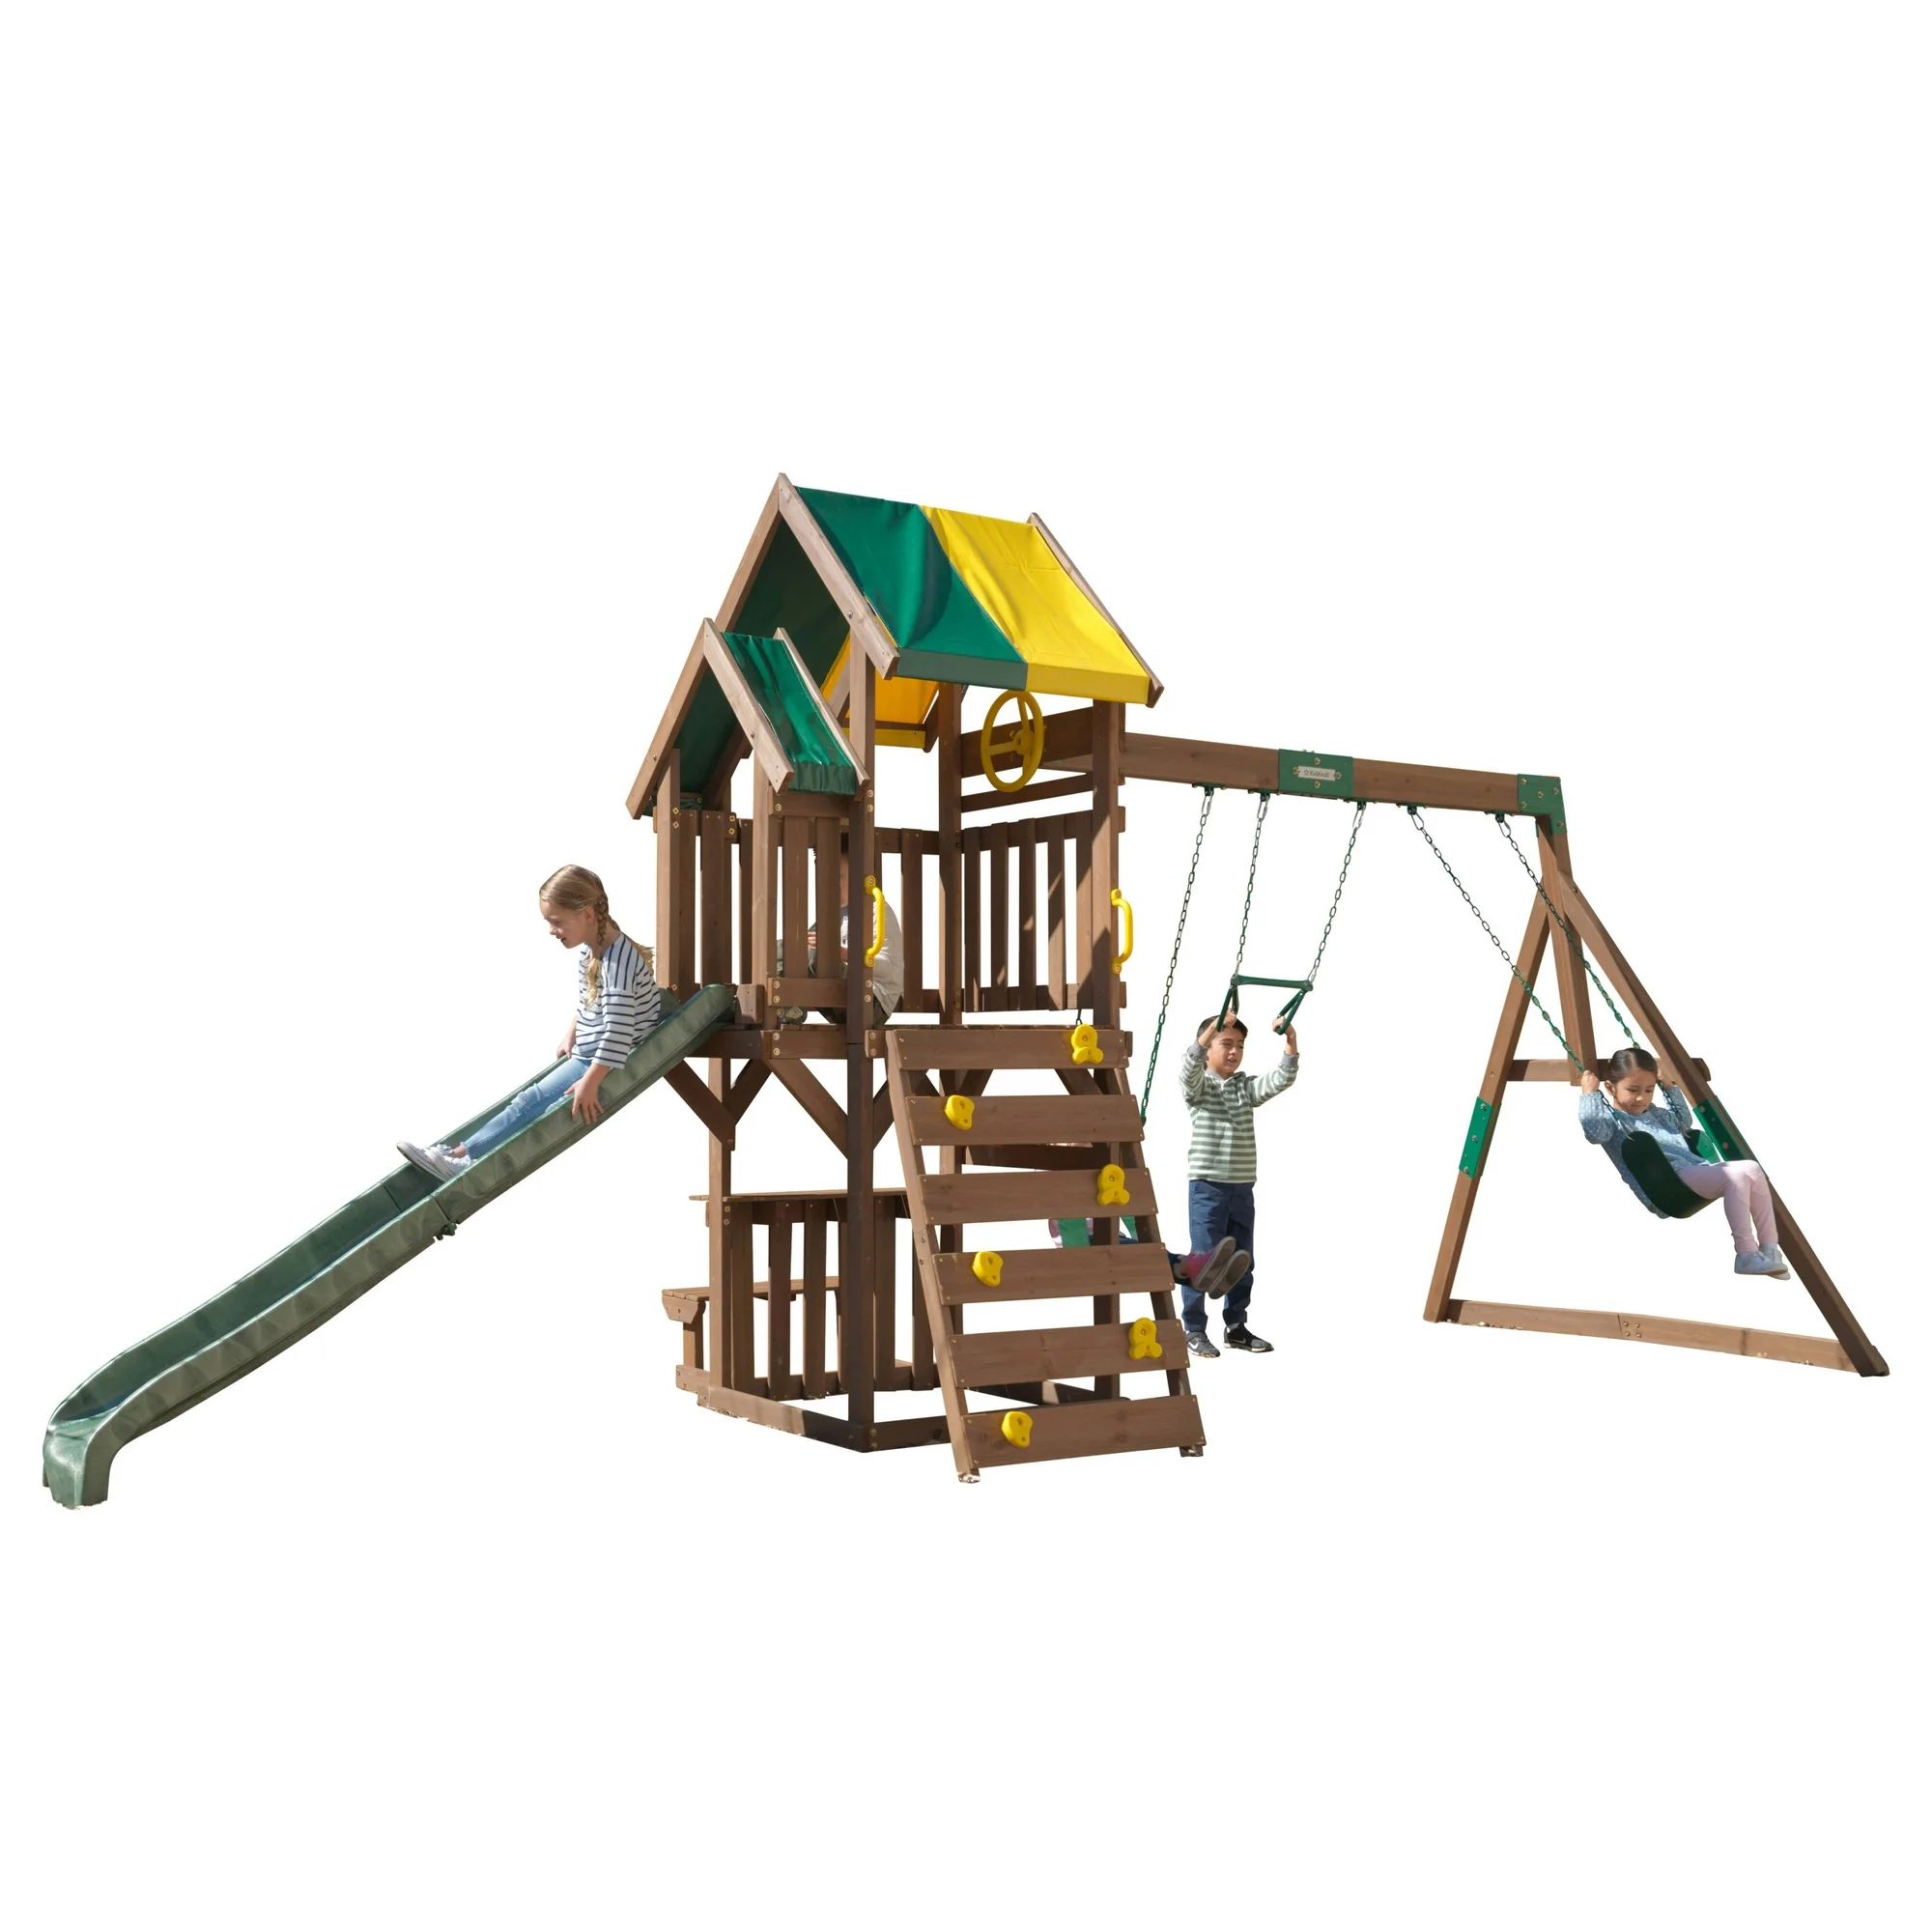 KidKraft Arbor Crest Wooden Swing Set / Playset with Table and Bench | Walmart (US)